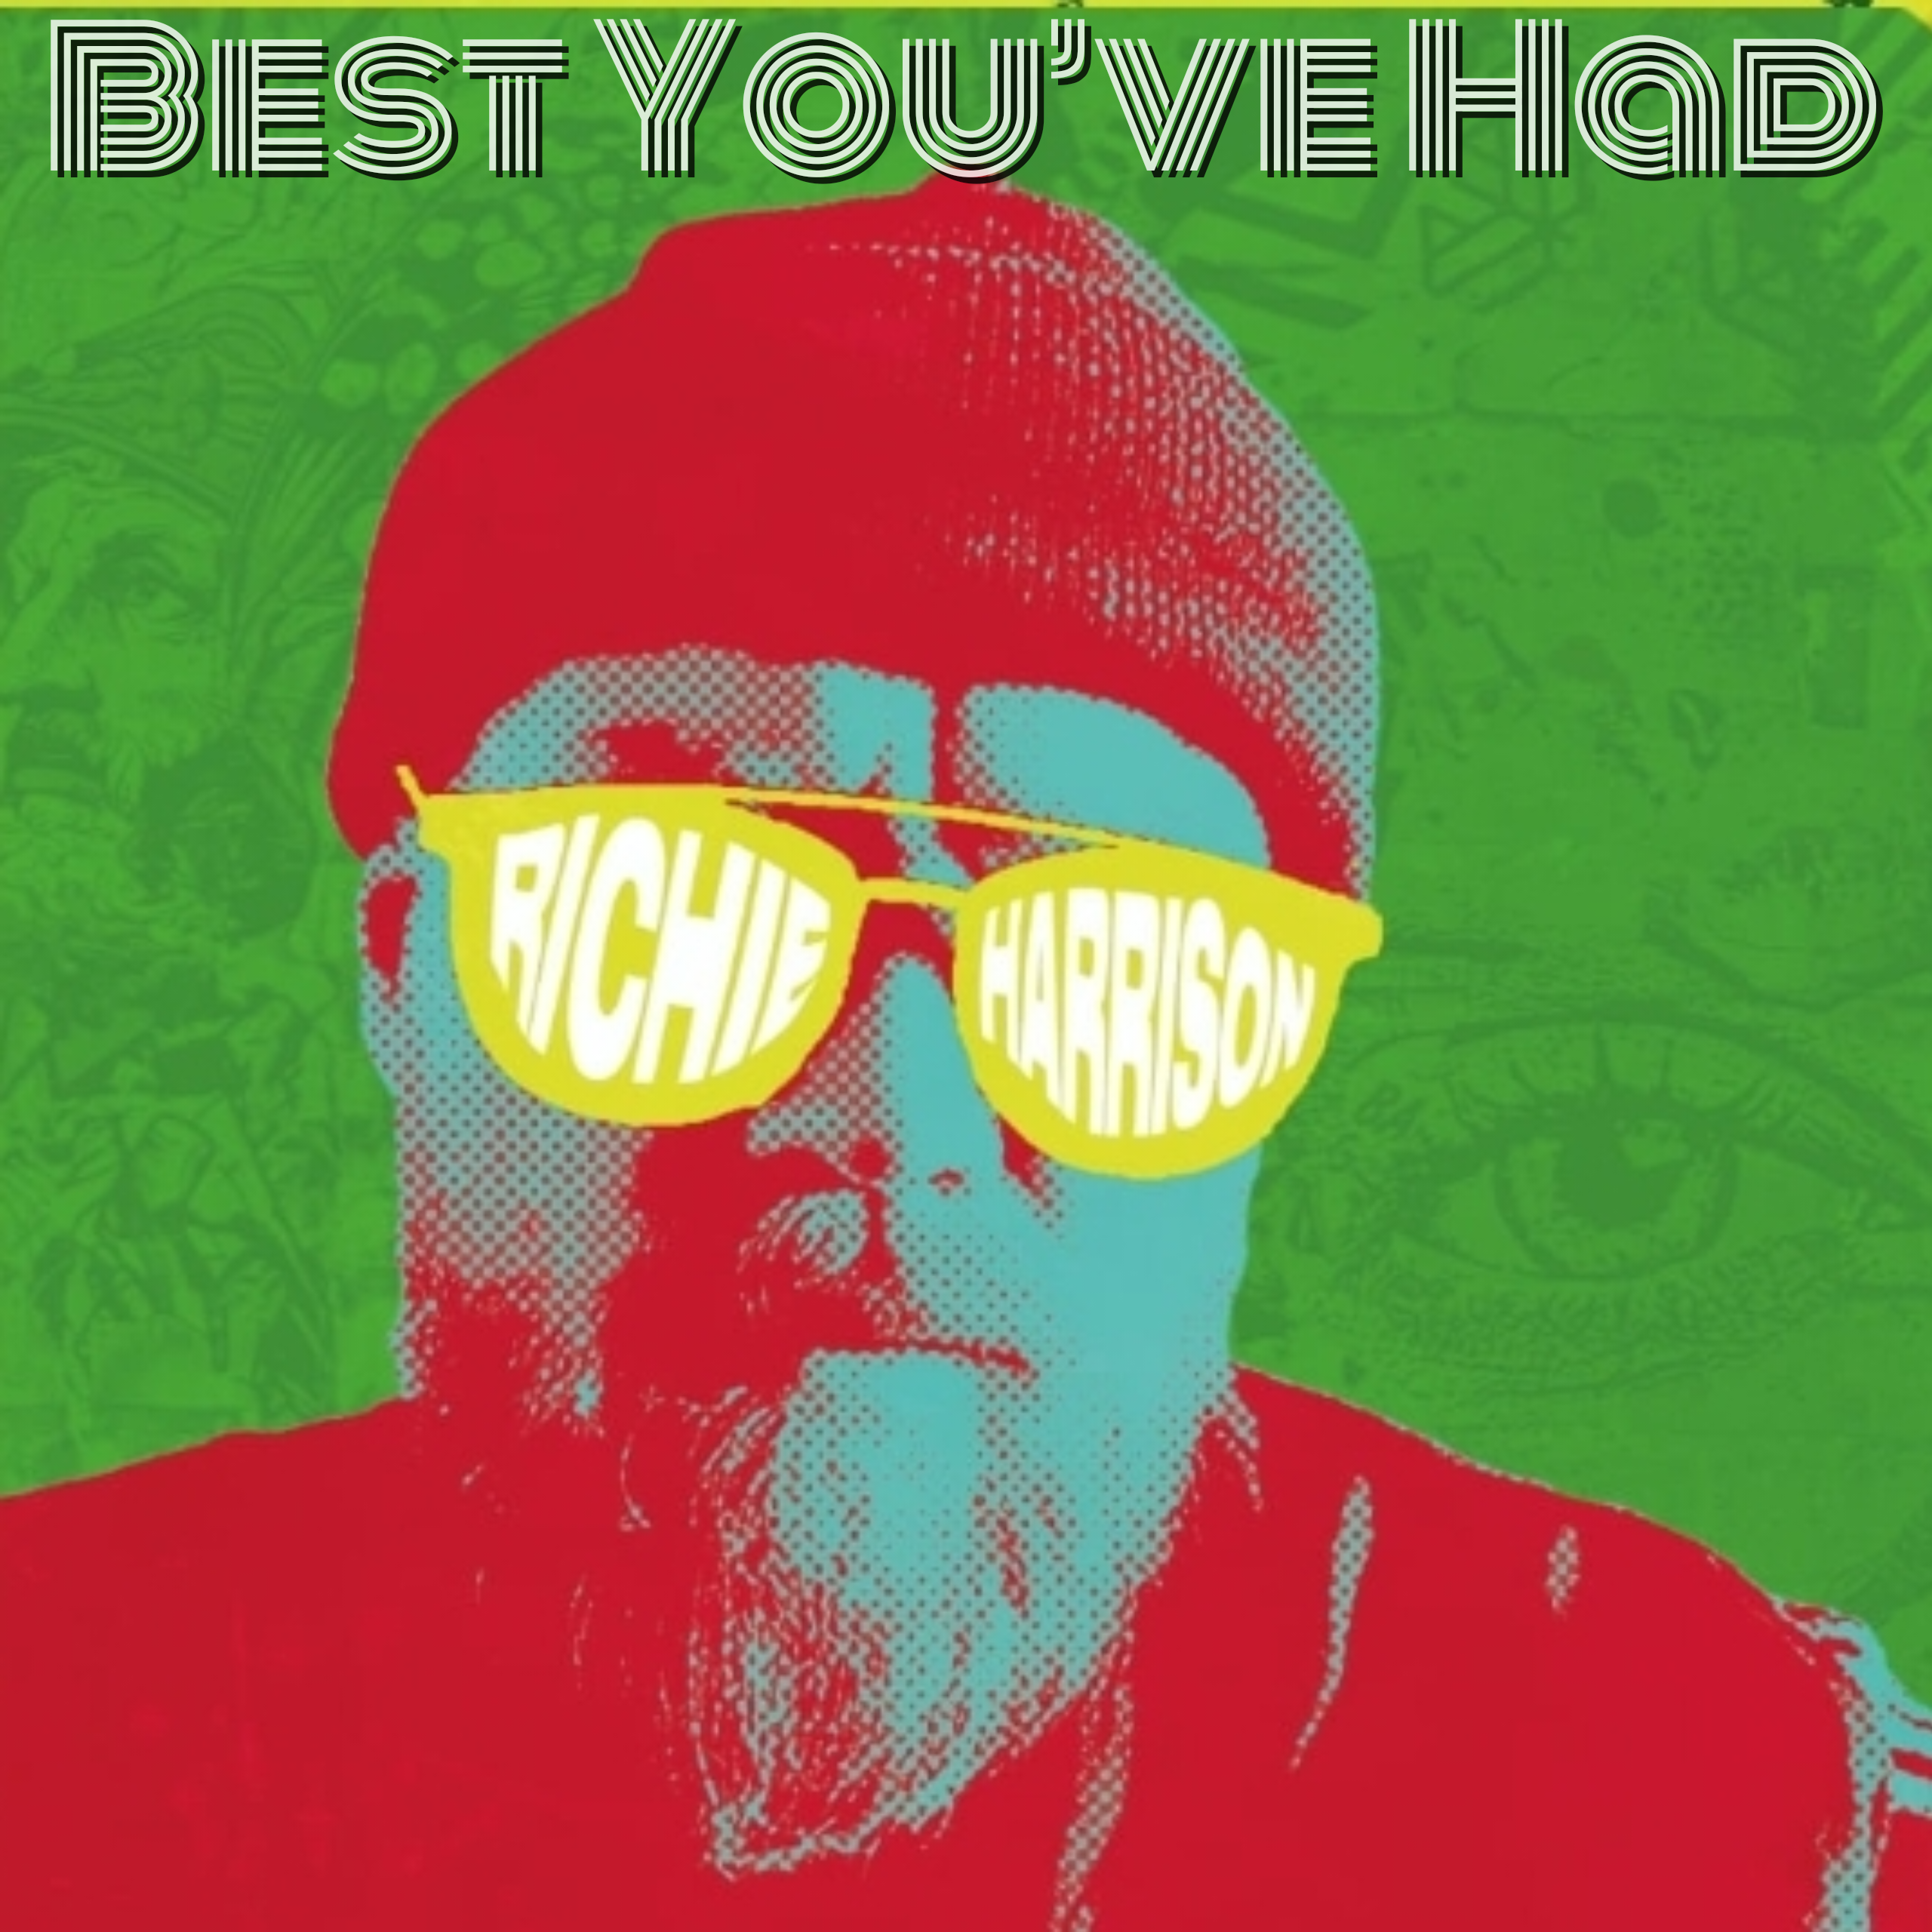 Richie Harrison Releases New Single “Best You’ve Had”